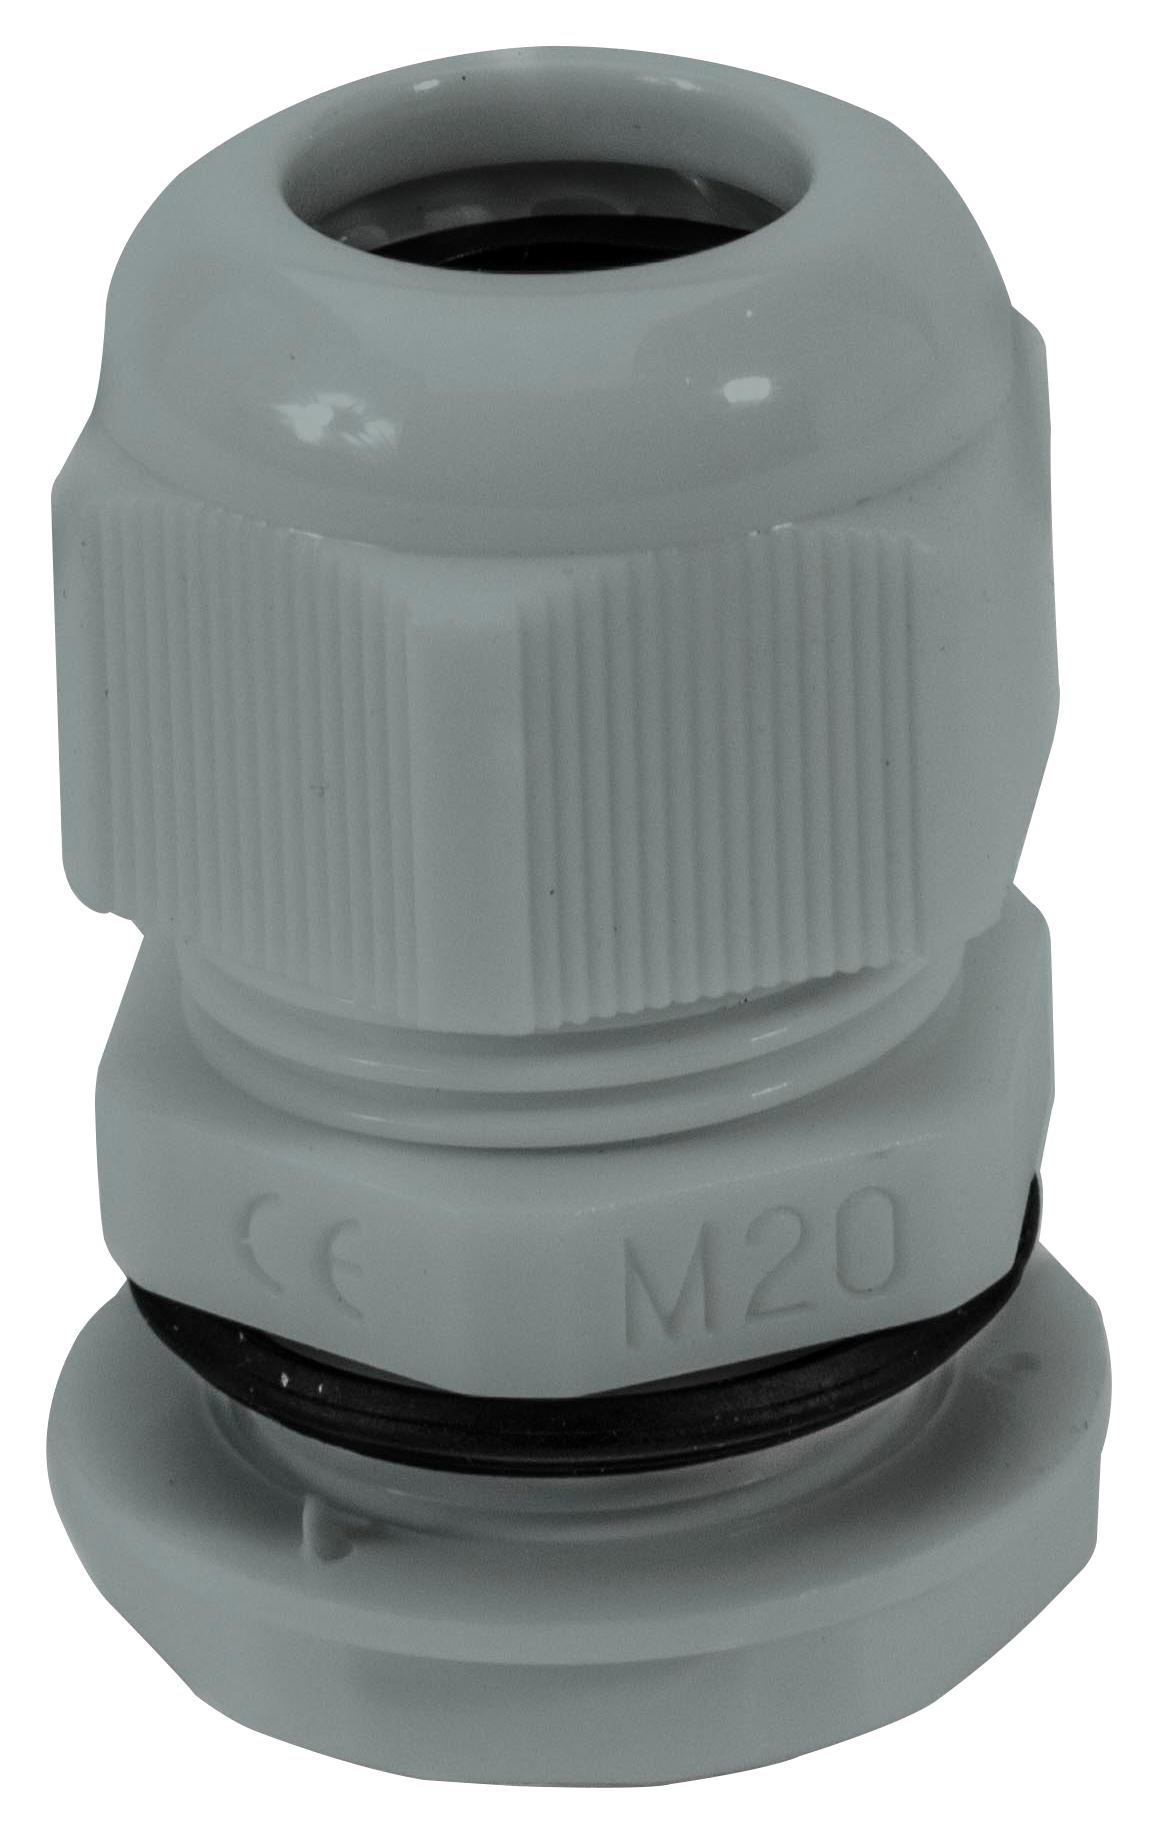 NGM20-DGY CABLE GLAND, NYLON 6.6, 10MM-14MM, GRY HELLERMANNTYTON